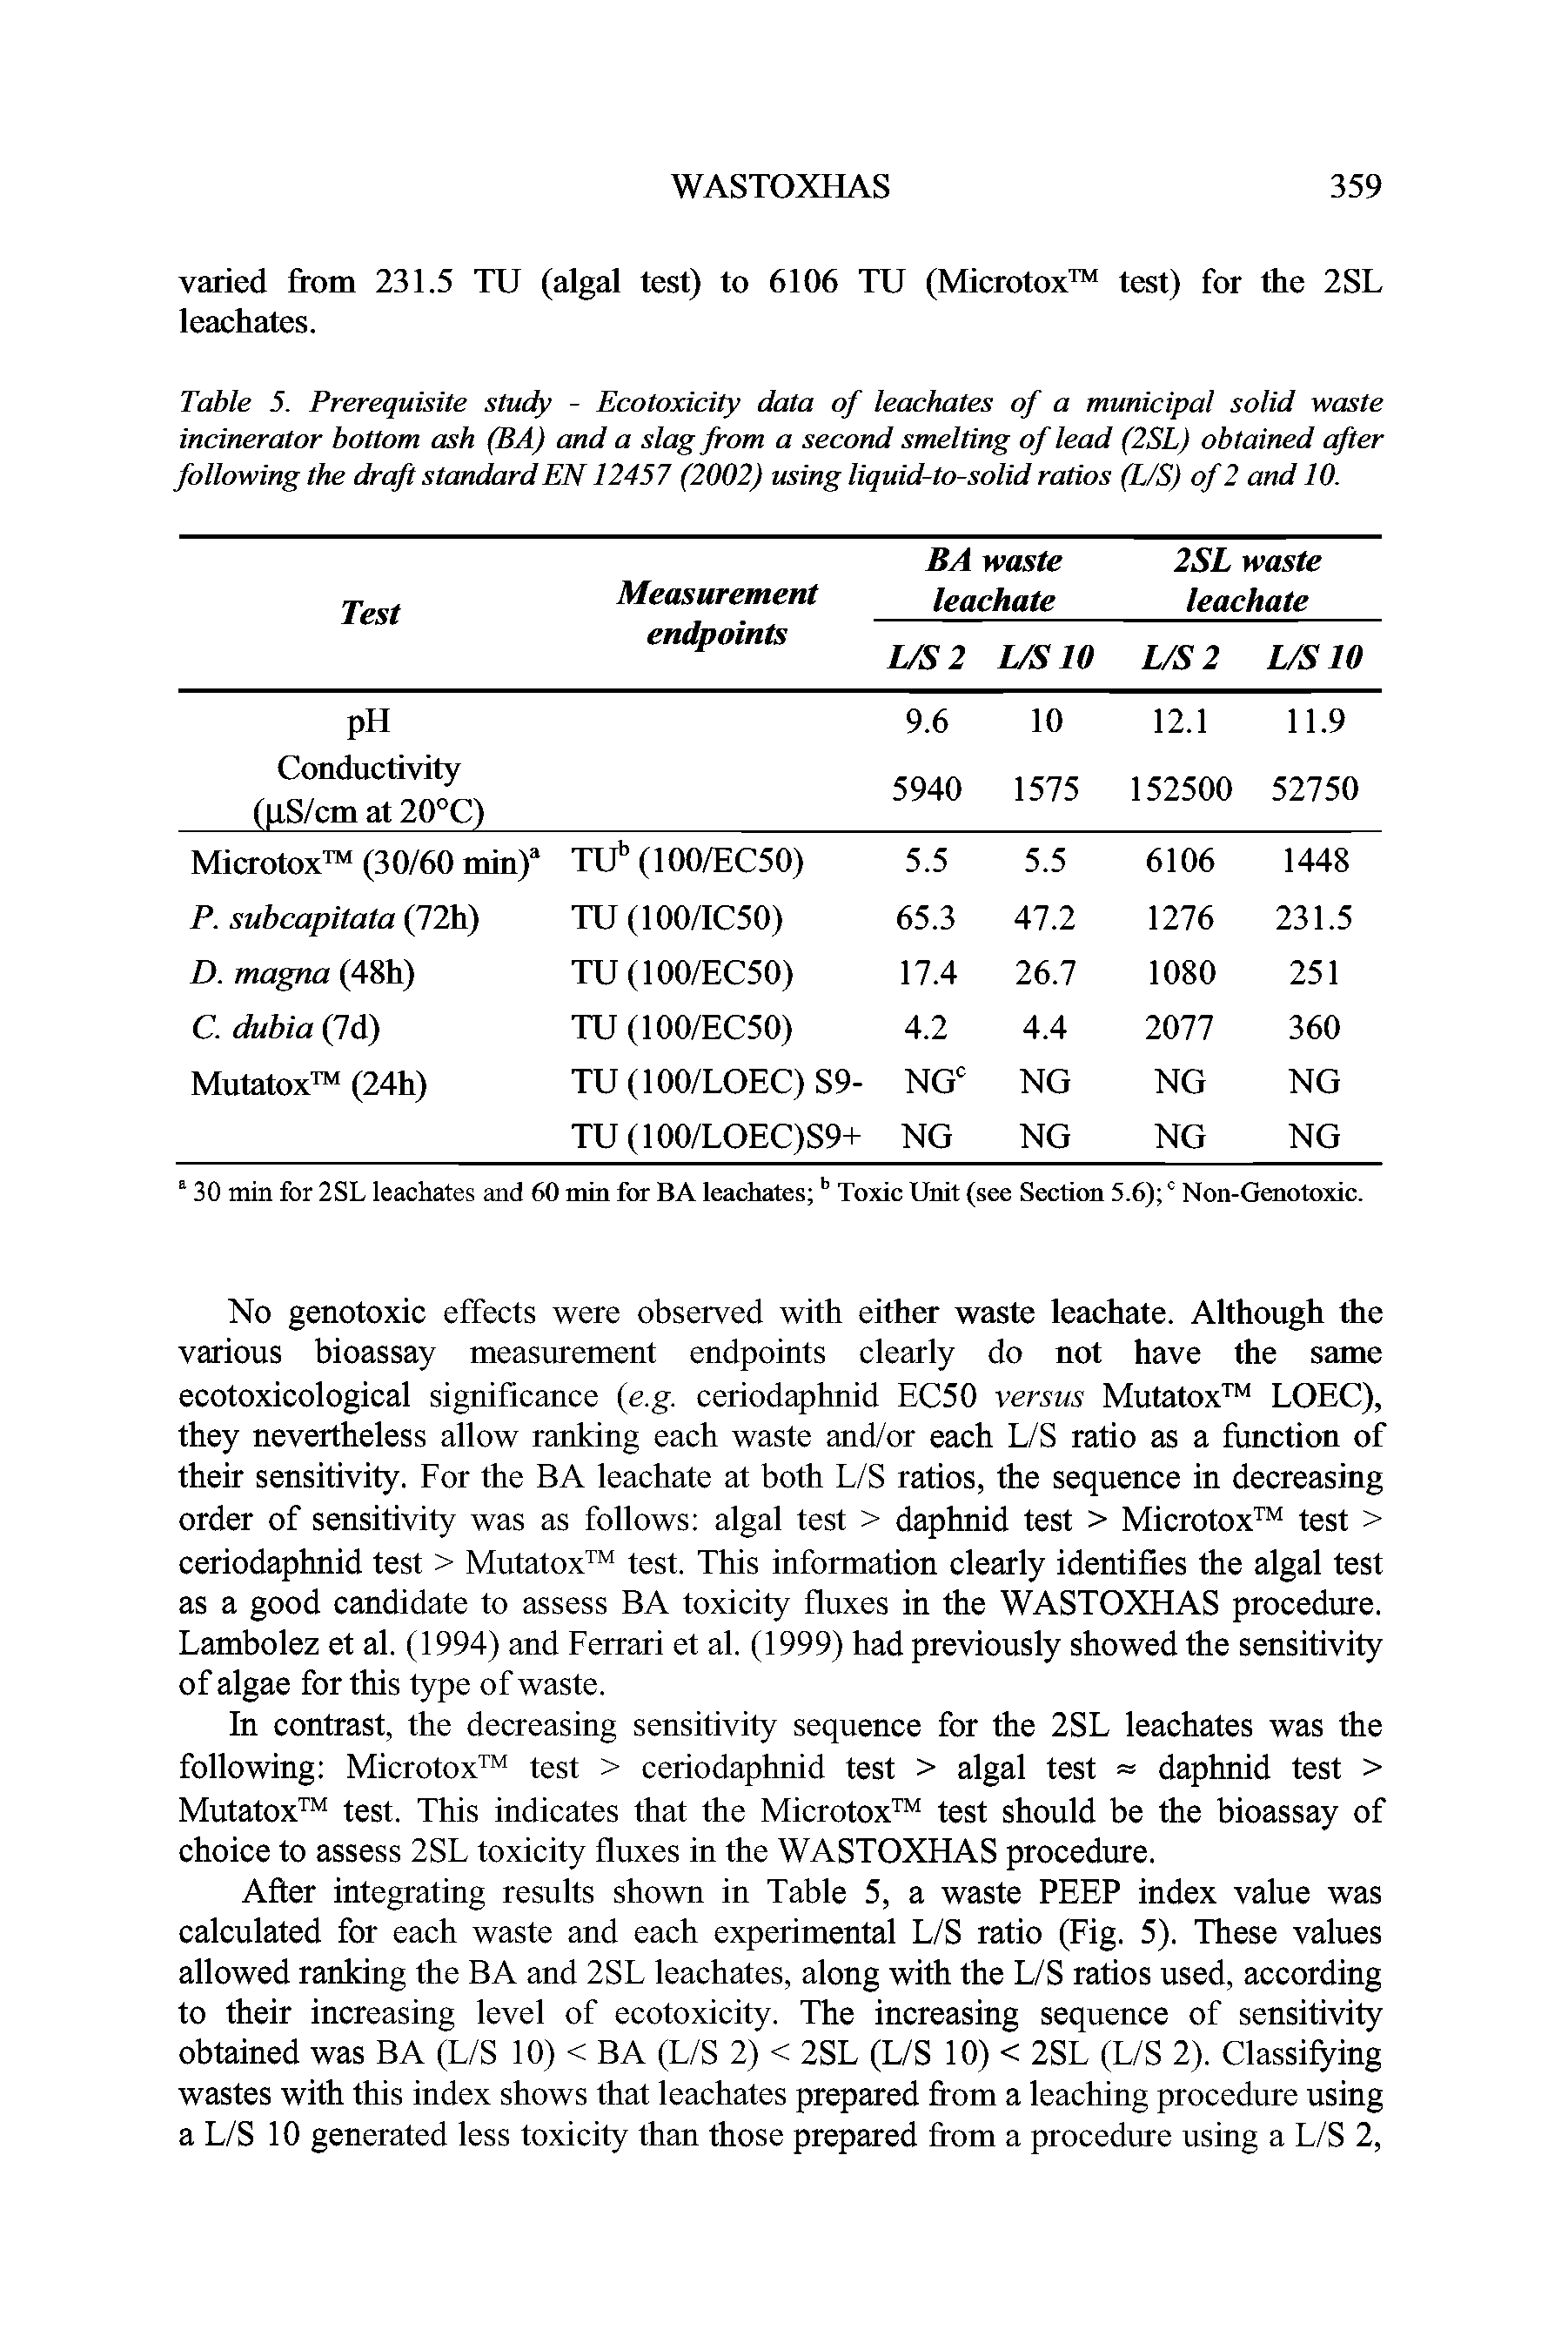 Table 5. Prerequisite study - Ecotoxicity data of leachates of a municipal solid waste incinerator bottom ash (BA) and a slag from a second smelting of lead (2SL) obtained after following the draft standardEN12457 (2002) using liquid-to-solid ratios (L/S) of 2 and 10.